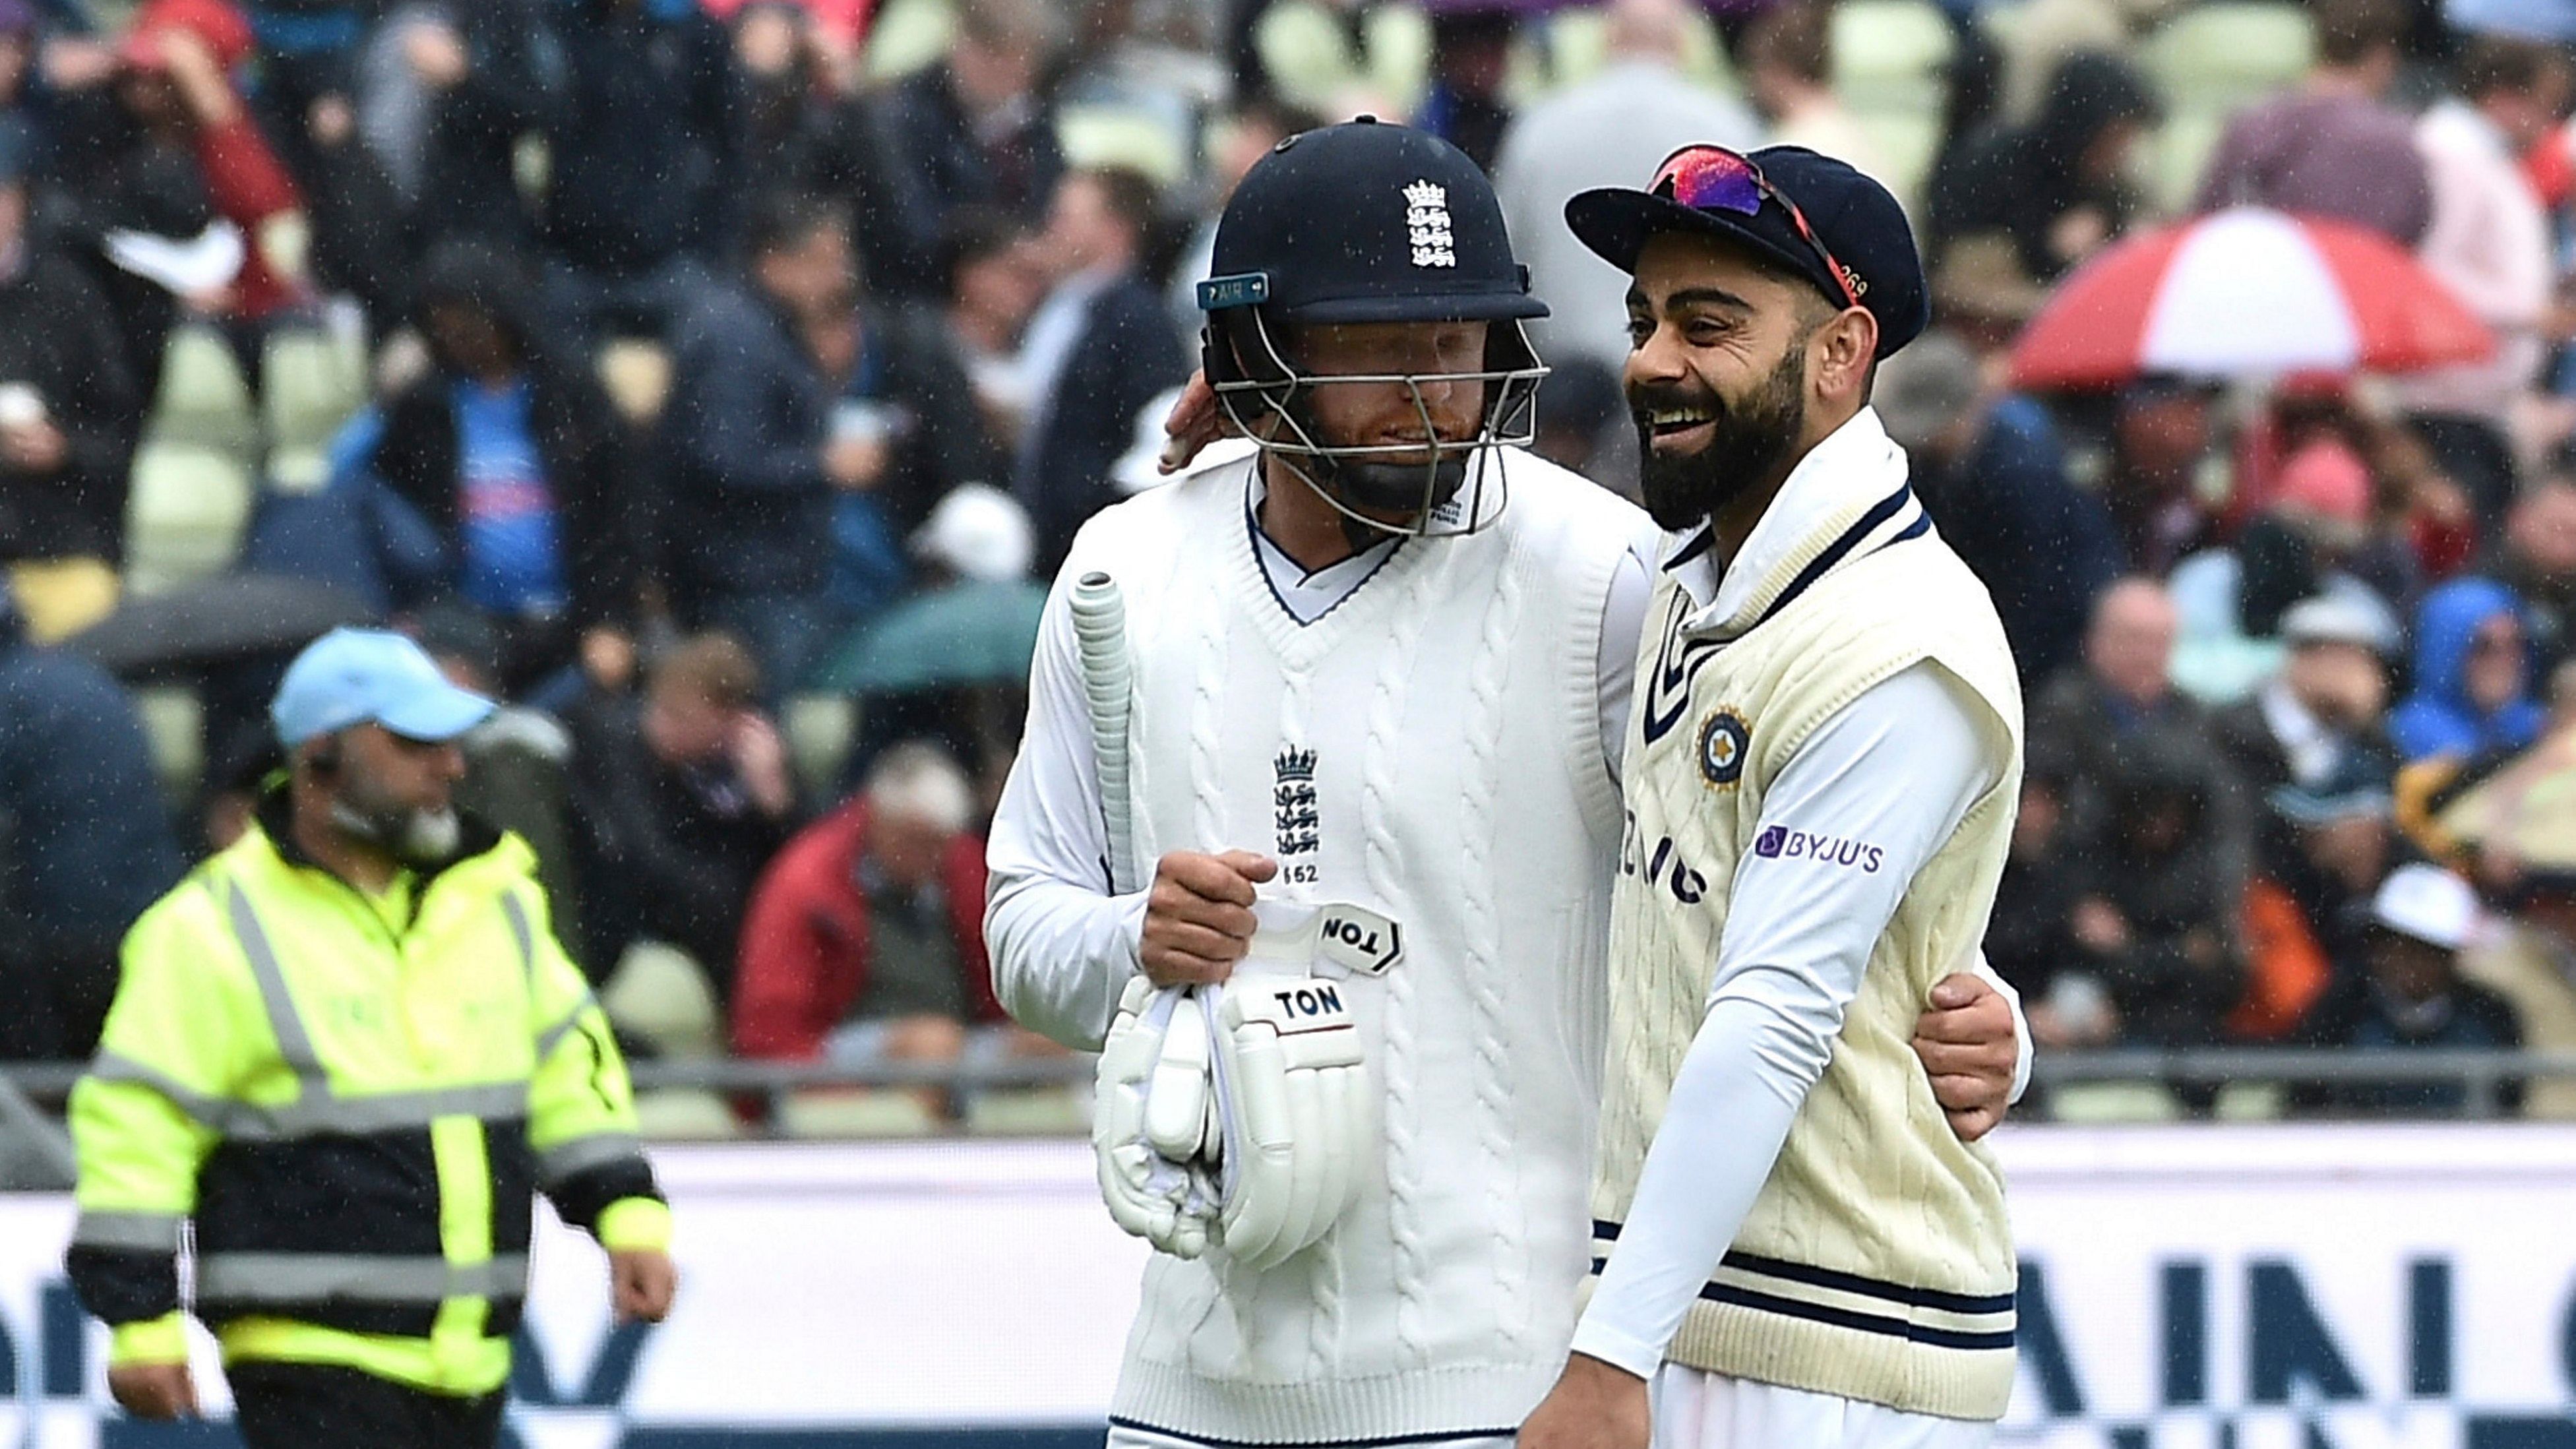 England's Jonny Bairstow and India's Virat Kohli, right, leave the pitch as rain stops play during the second day of the fifth cricket test match between England and India at Edgbaston. Credit: AP Photo